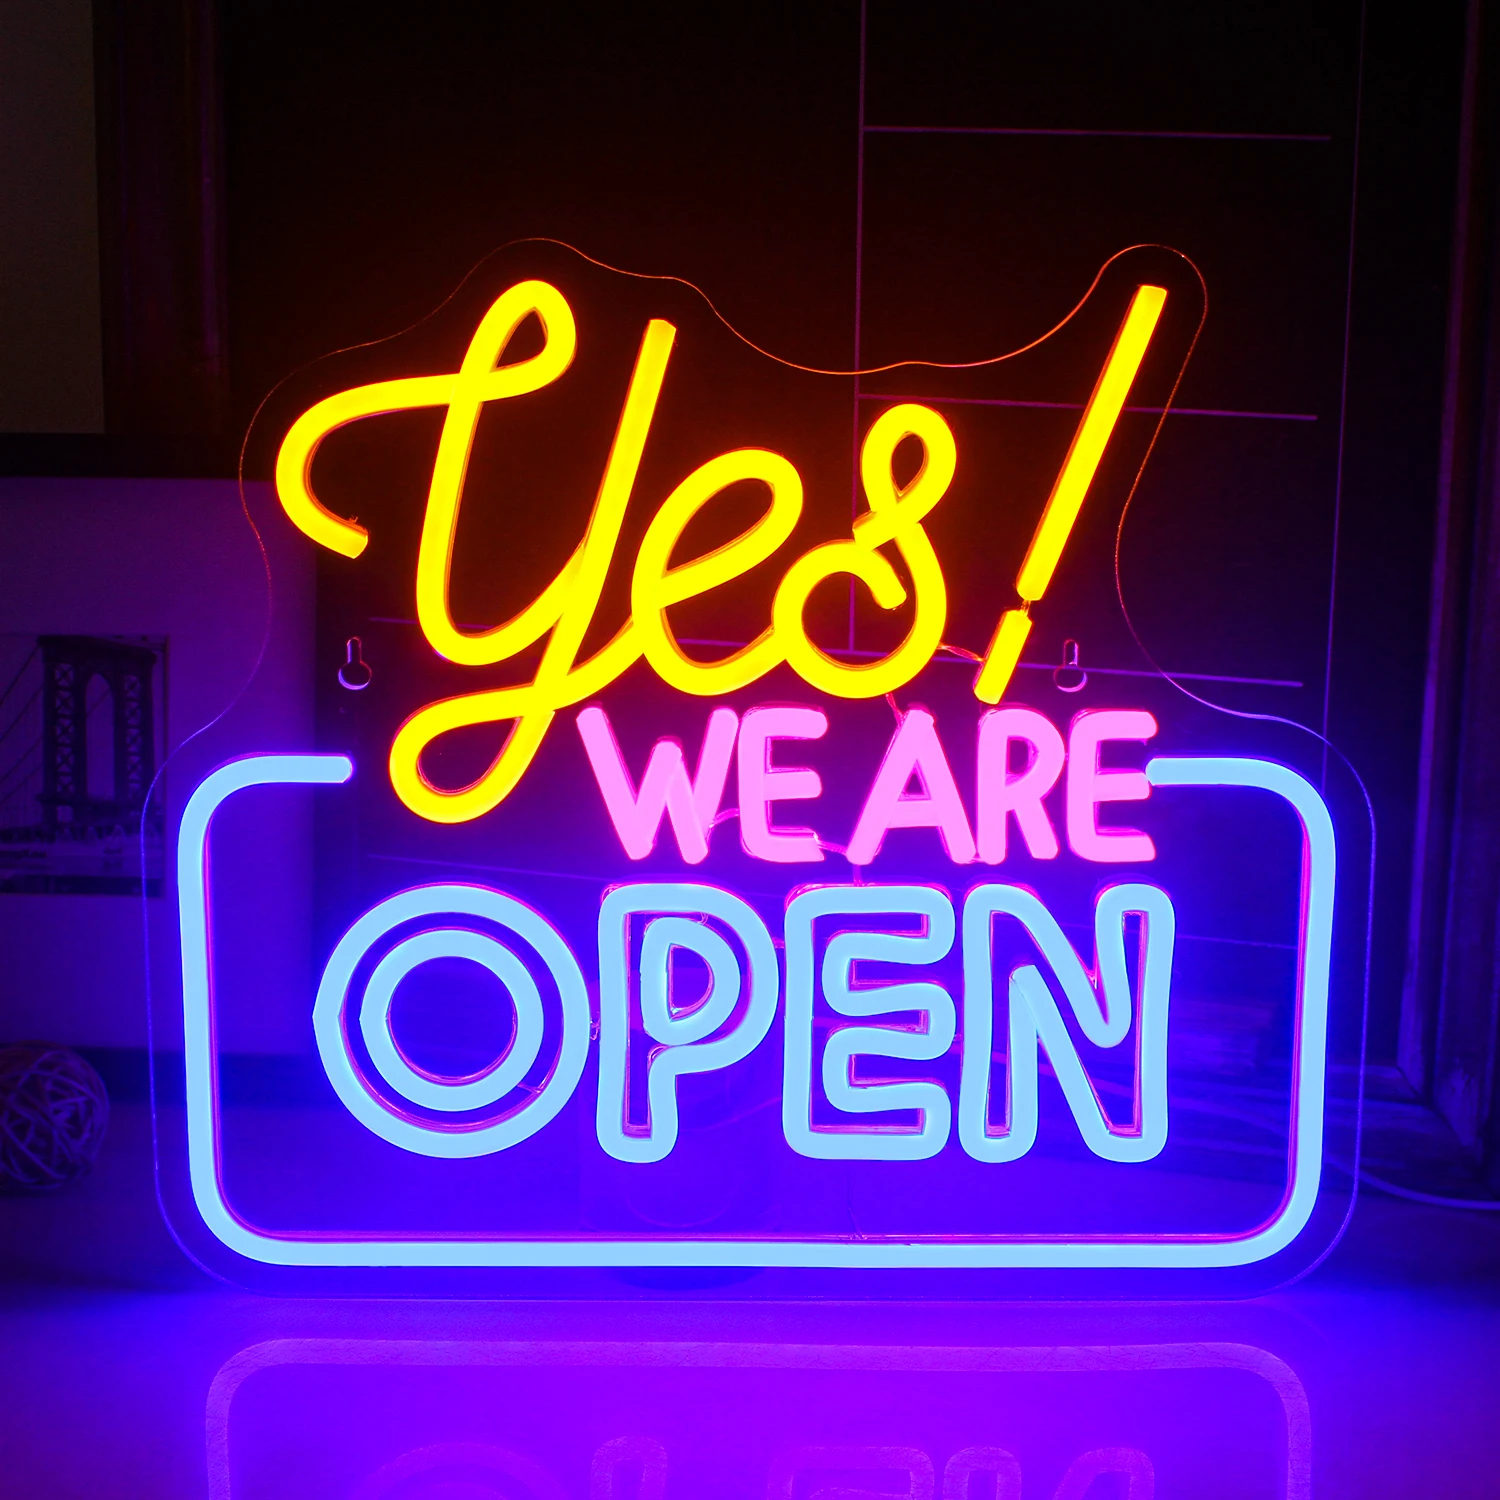 

Open Neon Signs Bright Led Light Advertisement Board Electric Display Sign Walls Window Door Bar Shop Coffee Salon Hotel Store